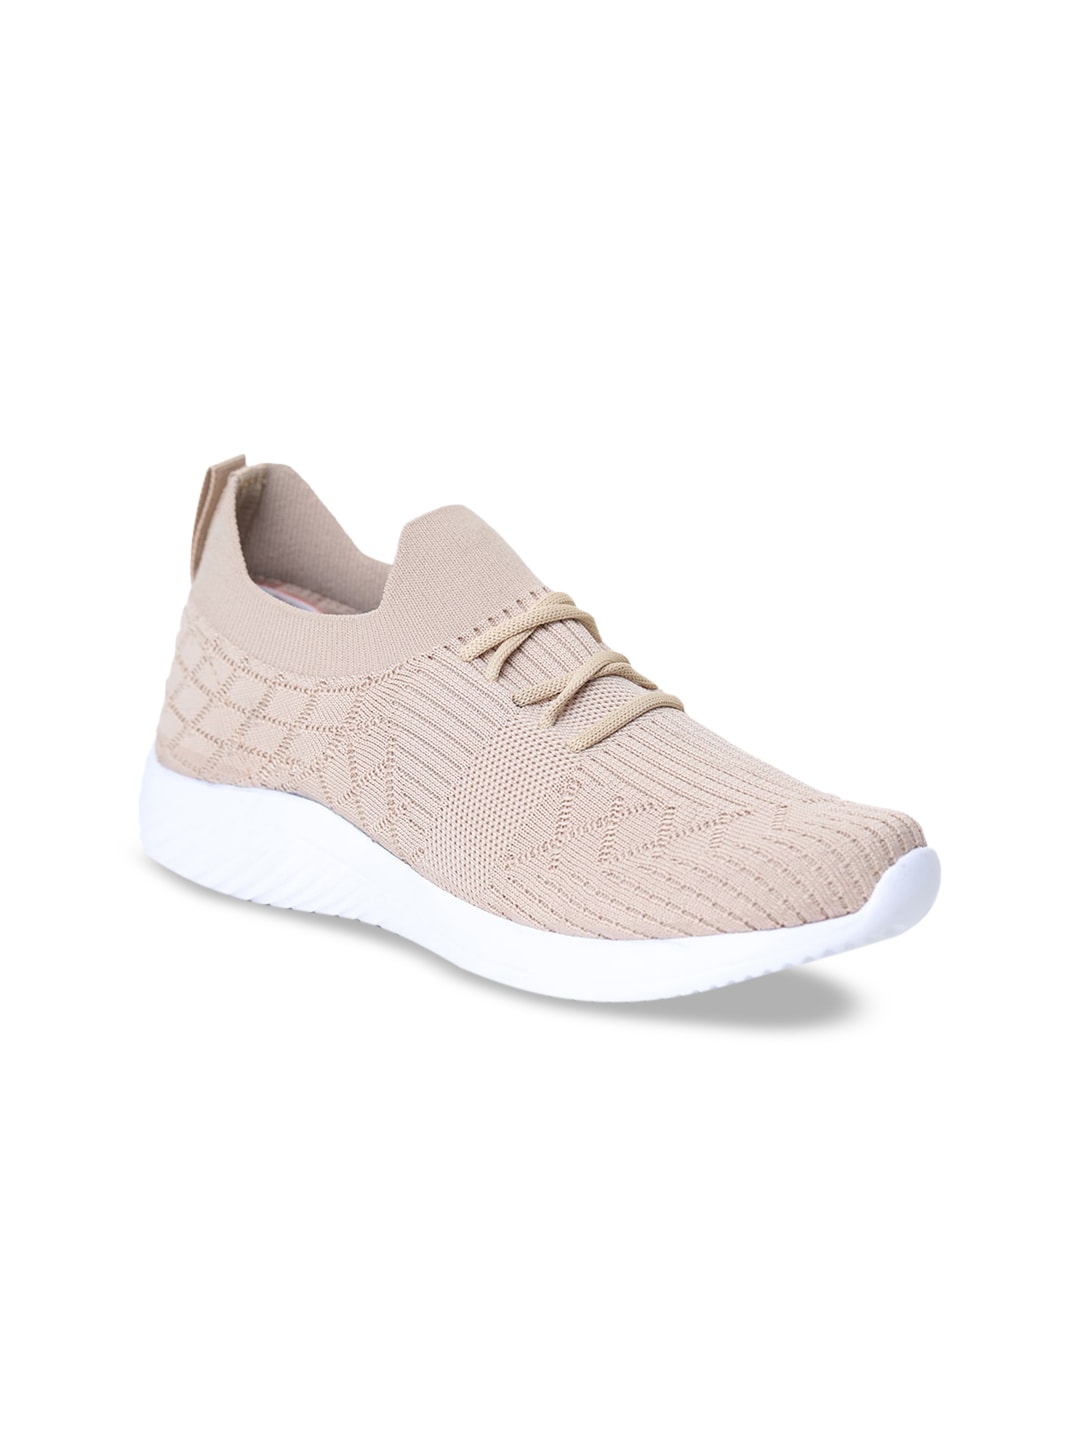 TRASE Women Beige Textured Slip-On Sneakers Price in India